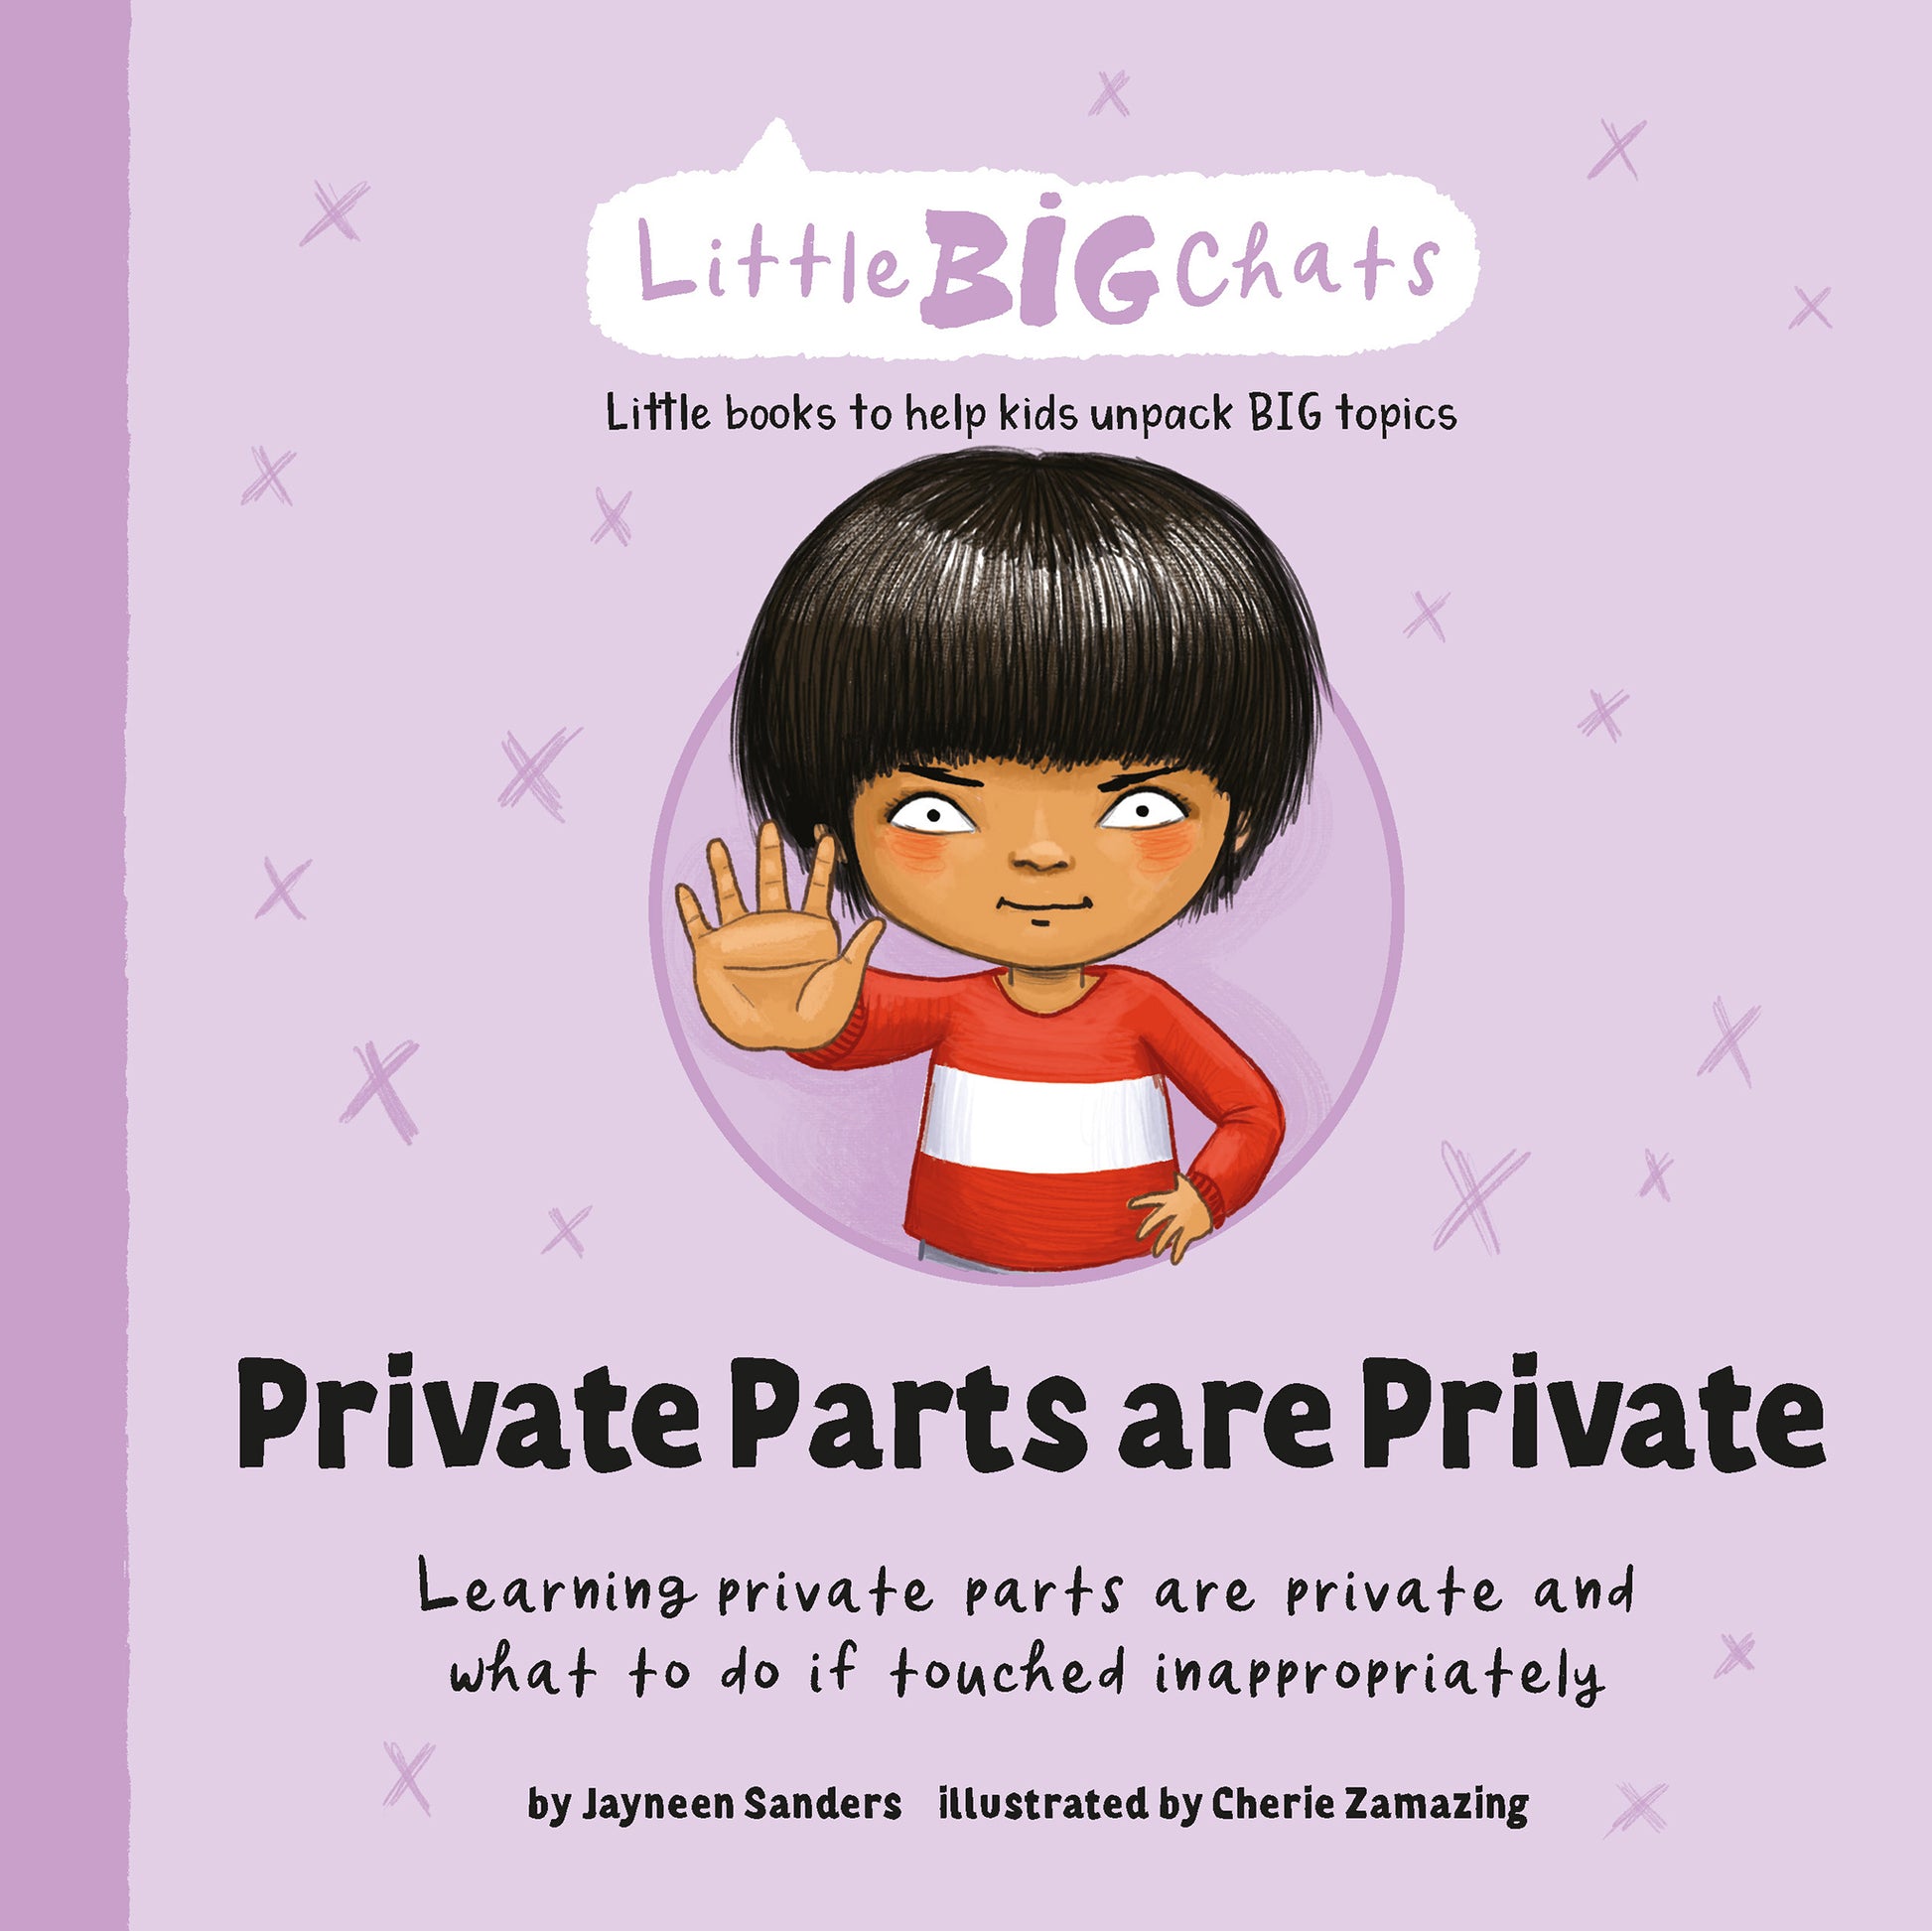 The cover of the Little BIG Chats book ‘Private Parts are Private’ by Jayneen Sanders.